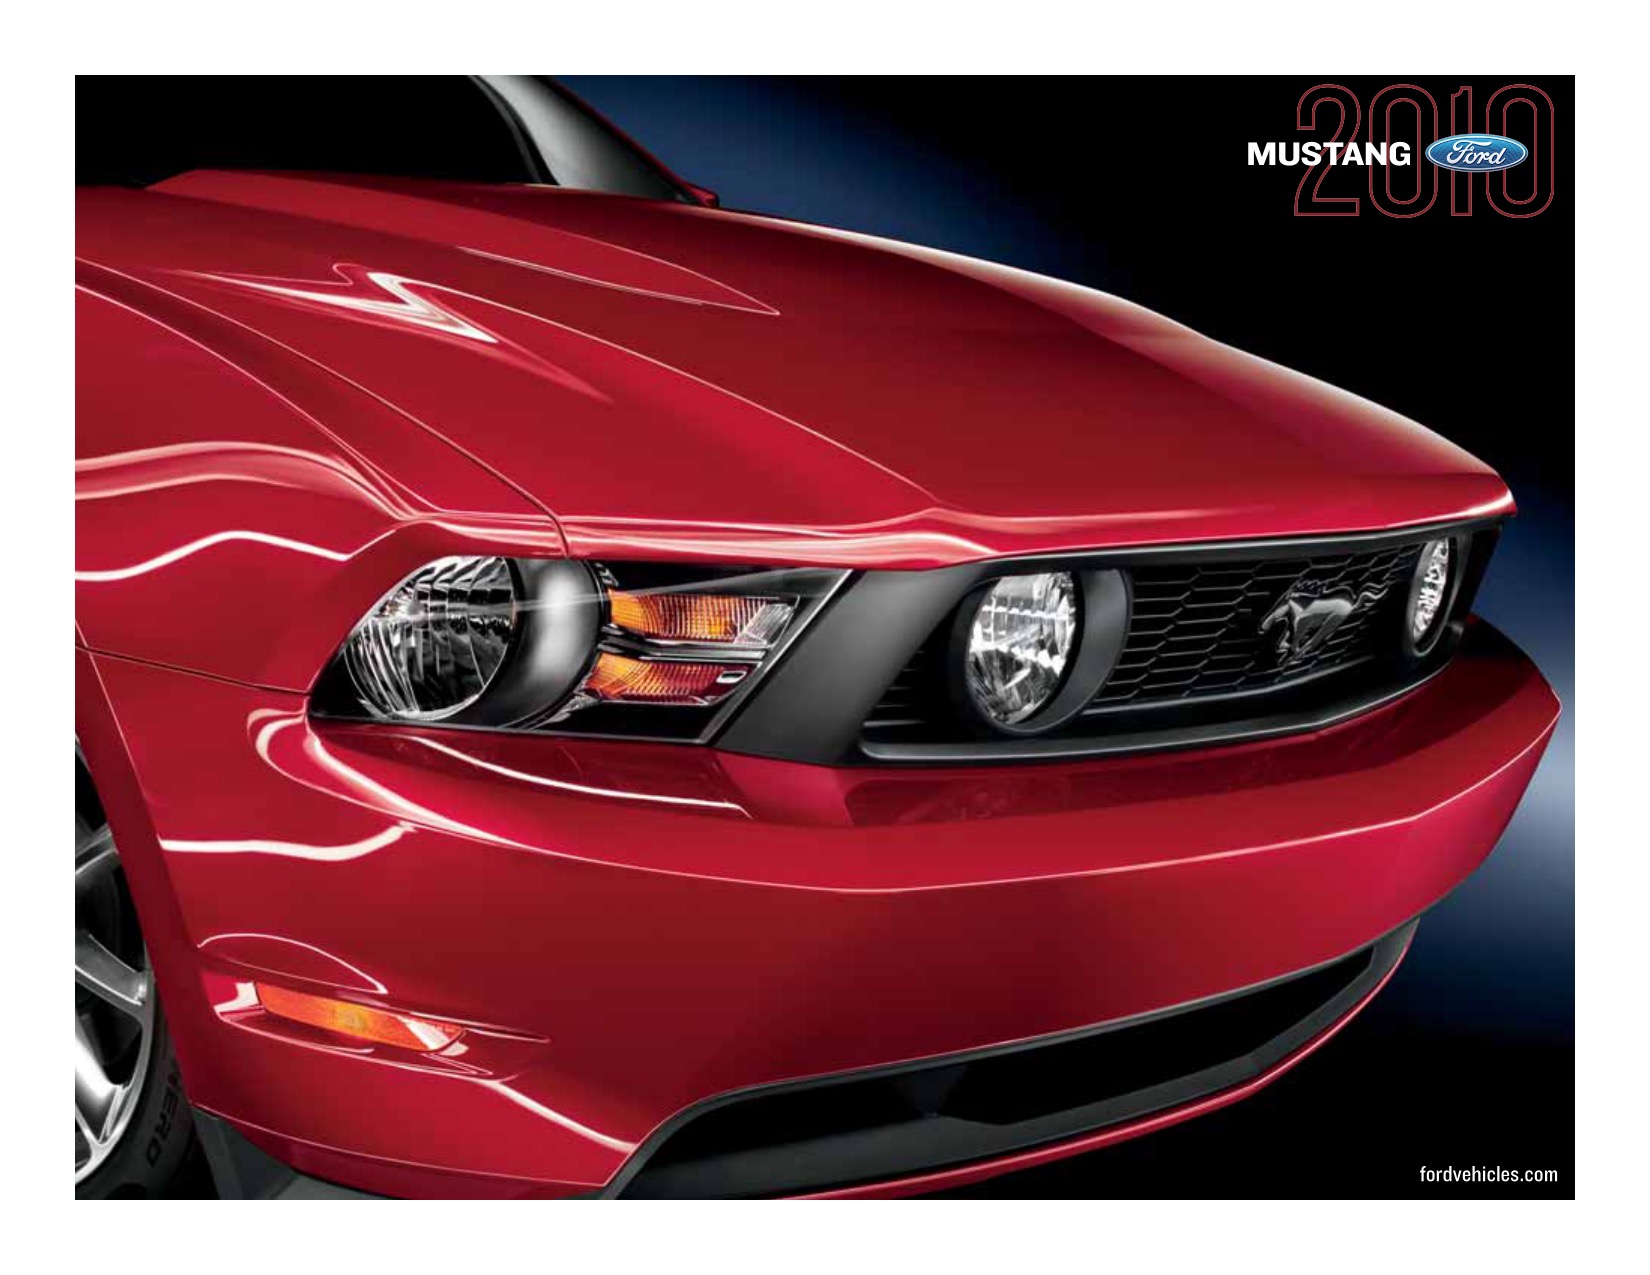 2010 Ford Mustang Brochure